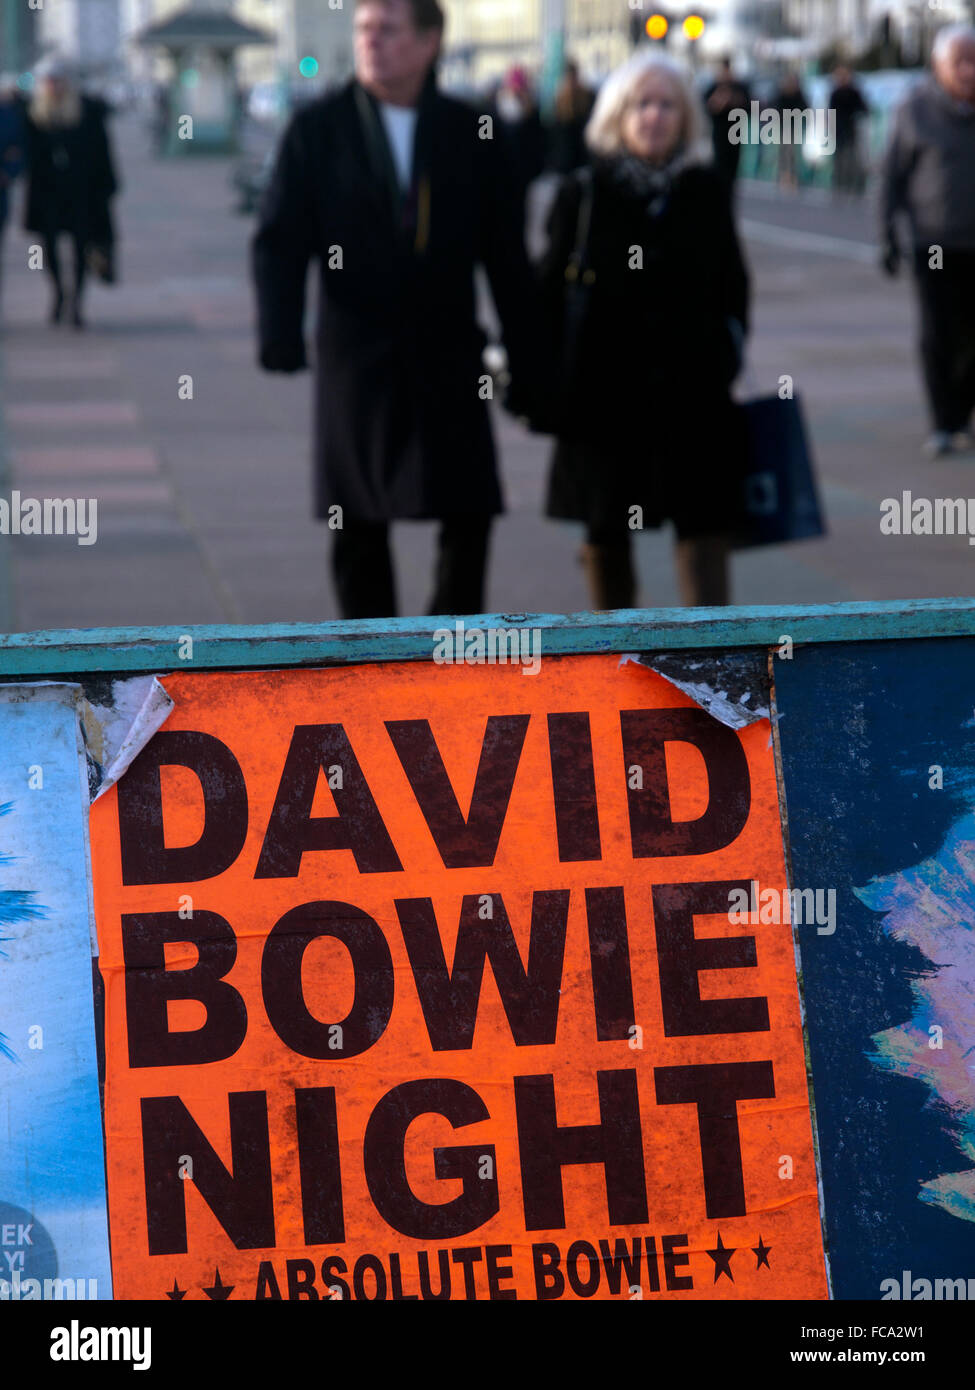 A poster for a concert by a David Bowie tribute band Stock Photo